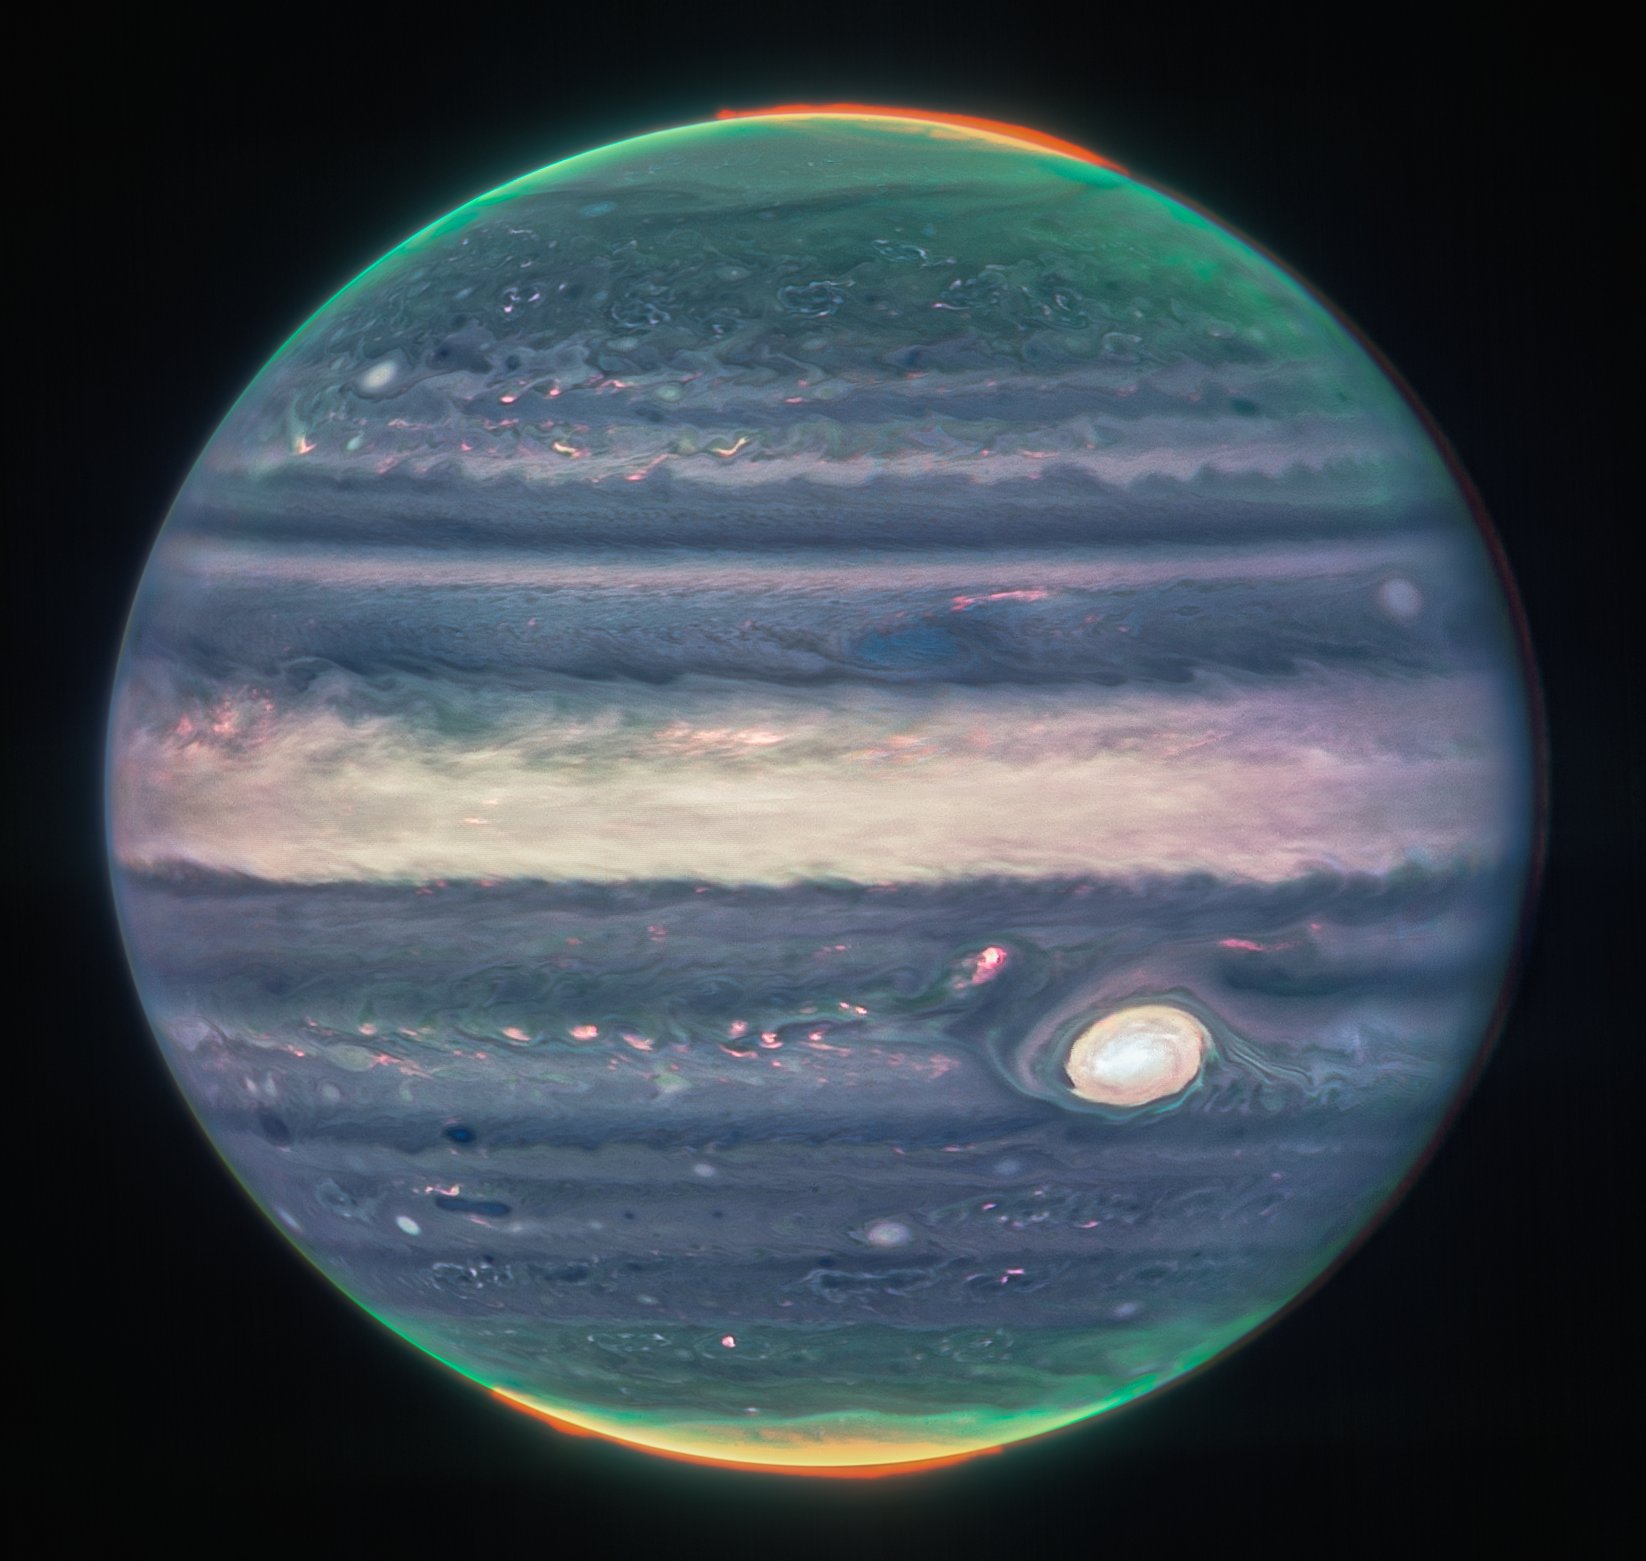 Jupiter dominates the black background of space. The image is a composite, and shows Jupiter in enhanced color, featuring the planet’s turbulent Great Red Spot, which appears white here. The planet is striated with swirling horizontal stripes of neon turquoise, periwinkle, light pink, and cream. The stripes interact and mix at their edges like cream in coffee. Along both of the poles, the planet glows in turquoise. Bright orange auroras glow just above the planet’s surface at both poles.